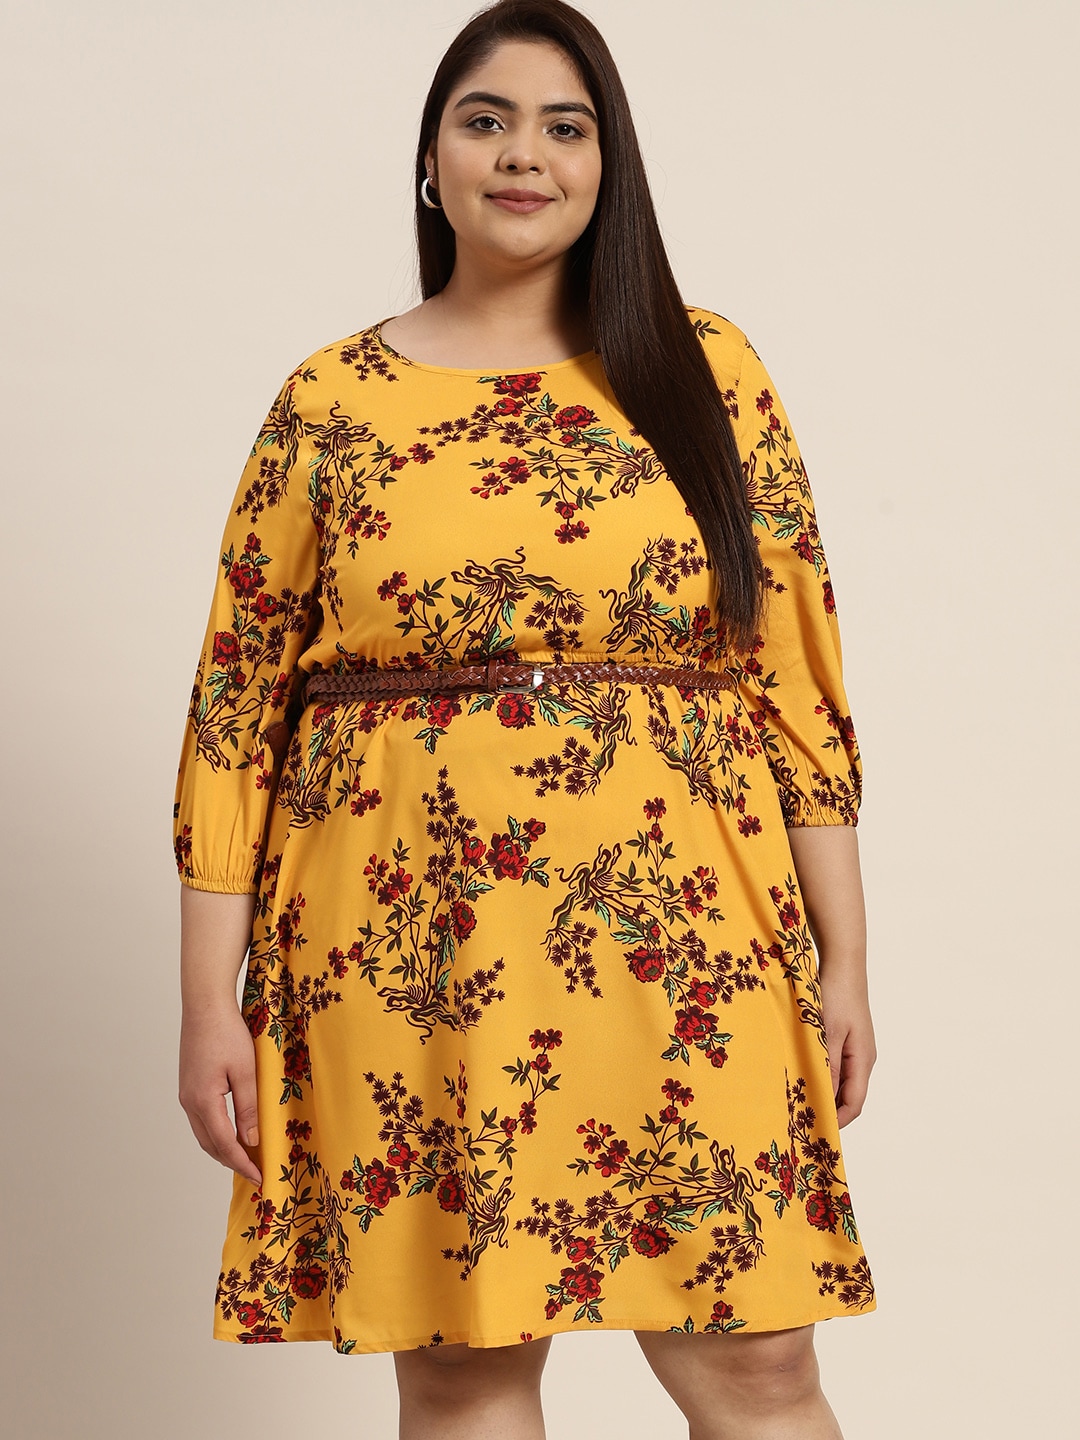 Sztori Plus Size Floral Print A-Line Dress With Belt Price in India